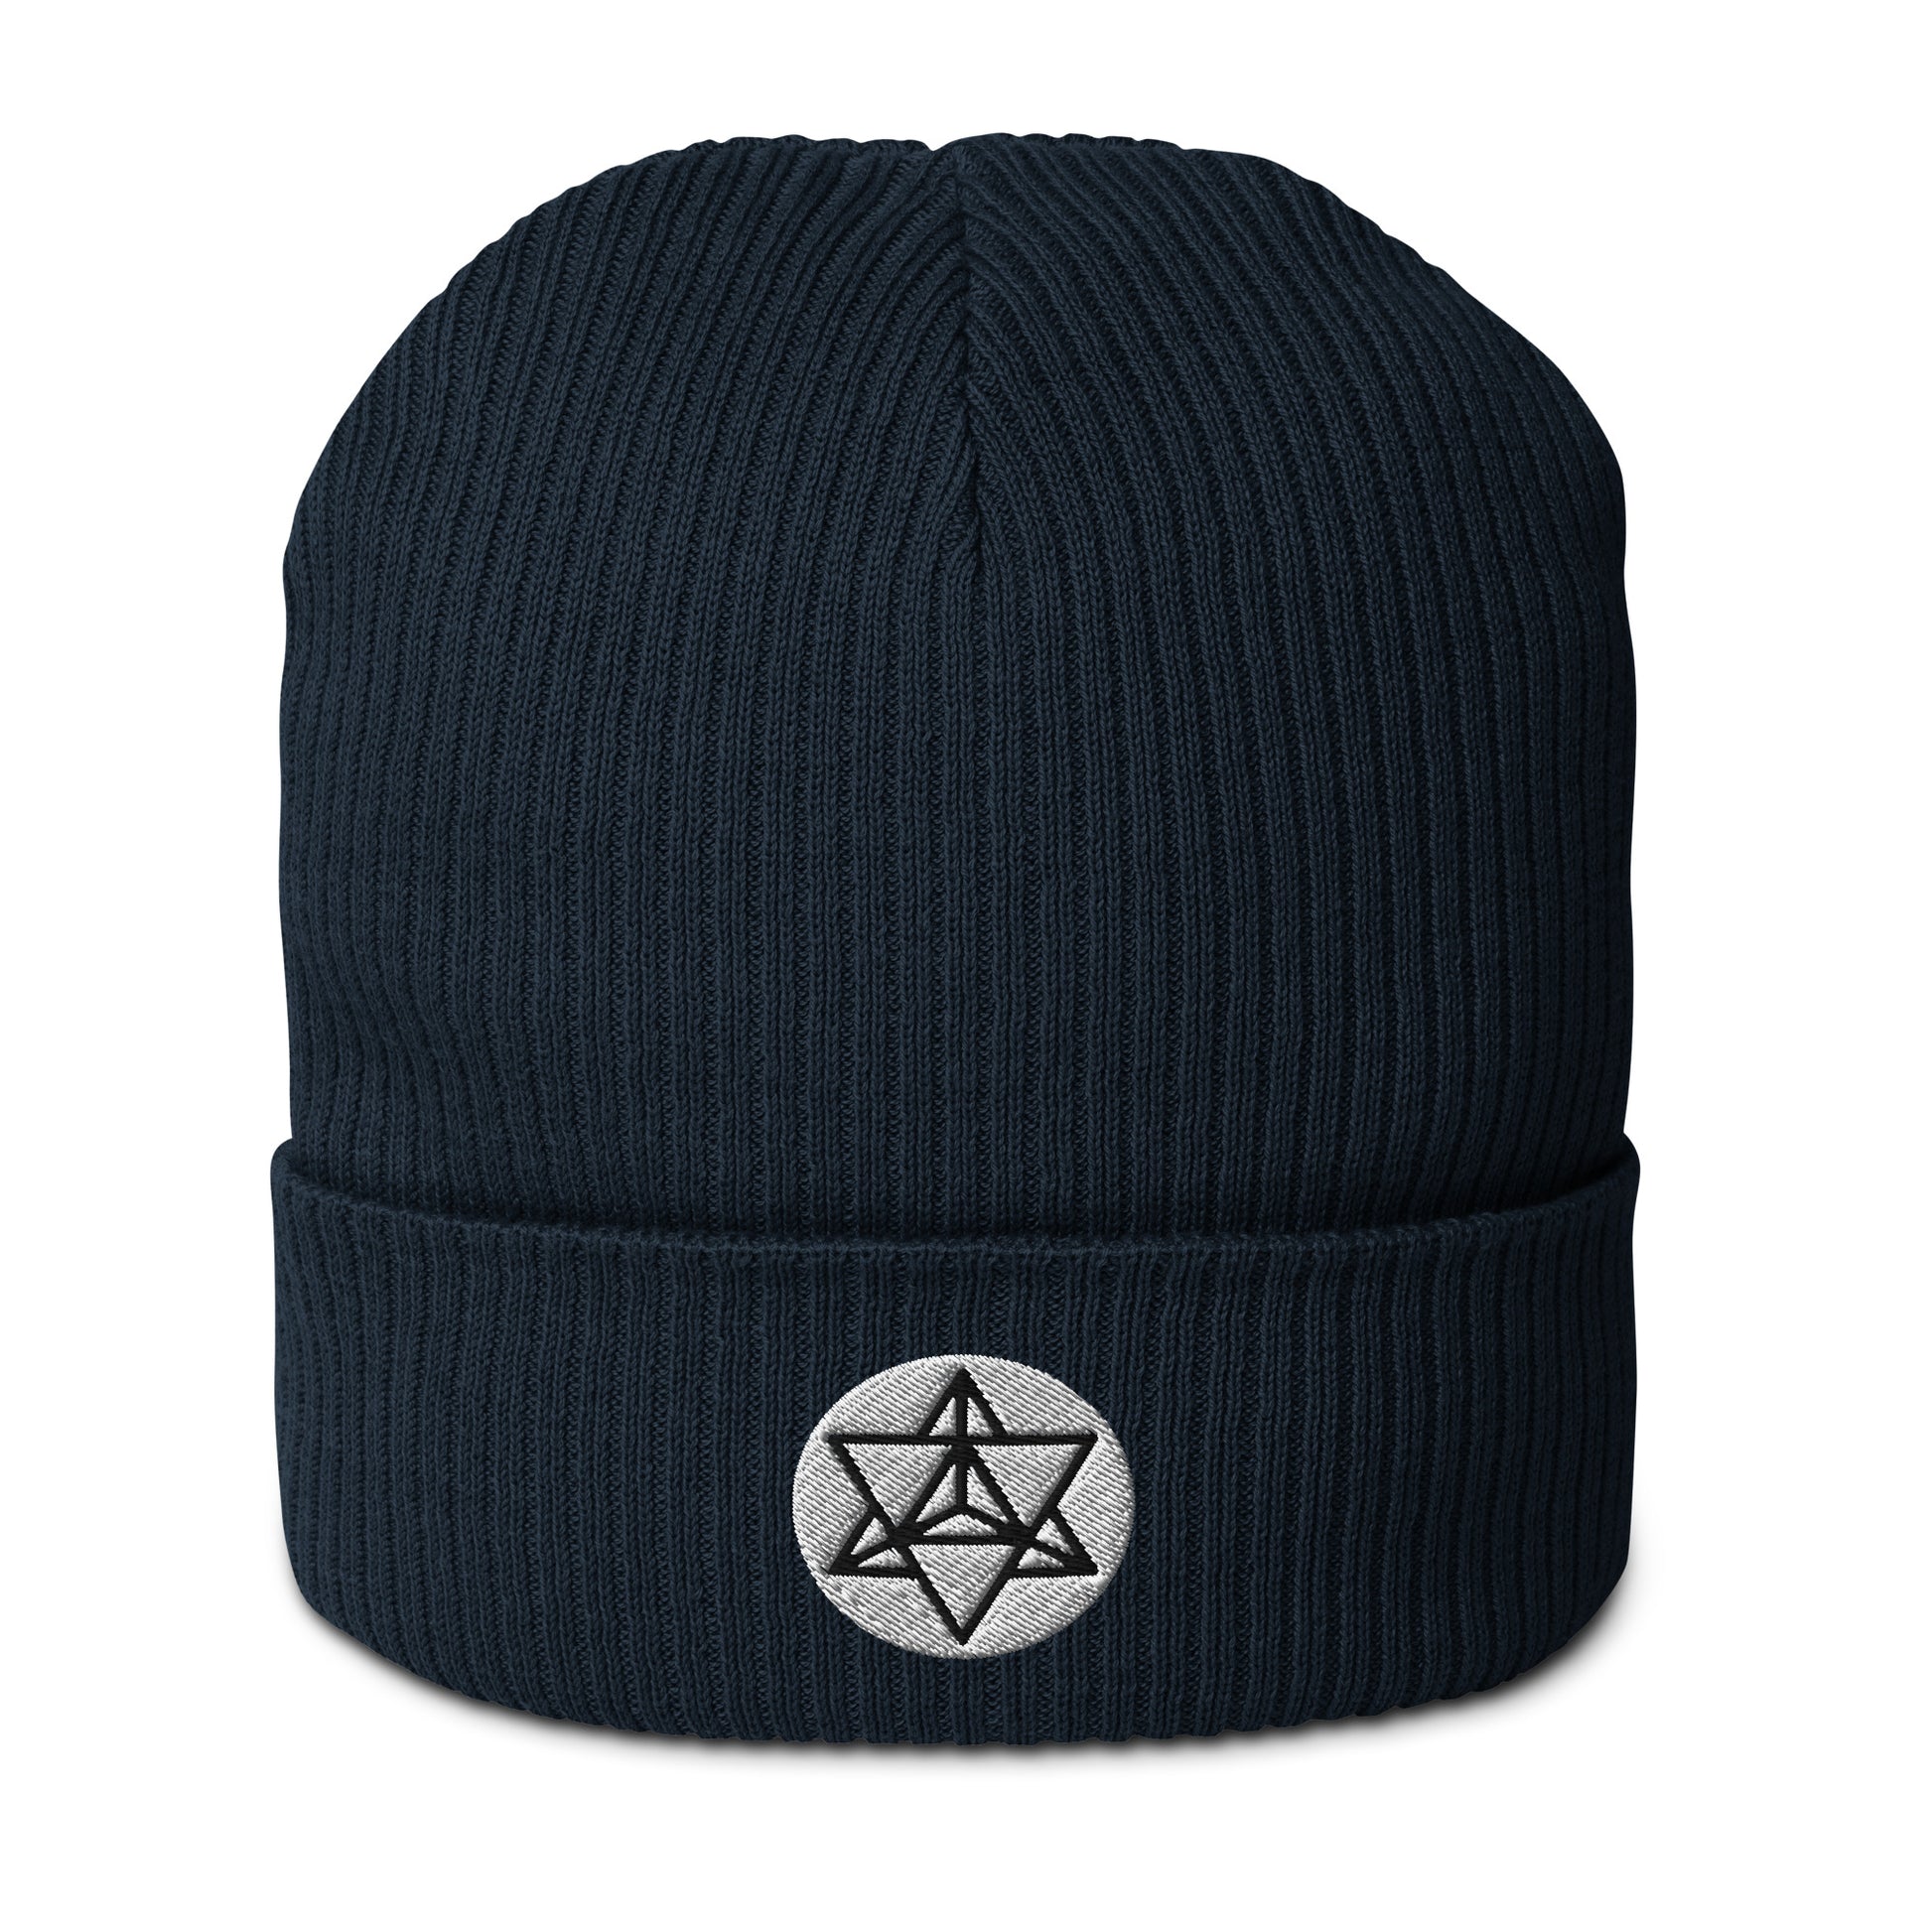 The Merkaba symbol beanie hat in Oxford Navy, crafted from organic cotton and adorned with intricate embroidery. Symbolizing the journey of ascension and divine protection, the Merkaba represents profound spiritual transformation and unity of mind, body, and spirit. 